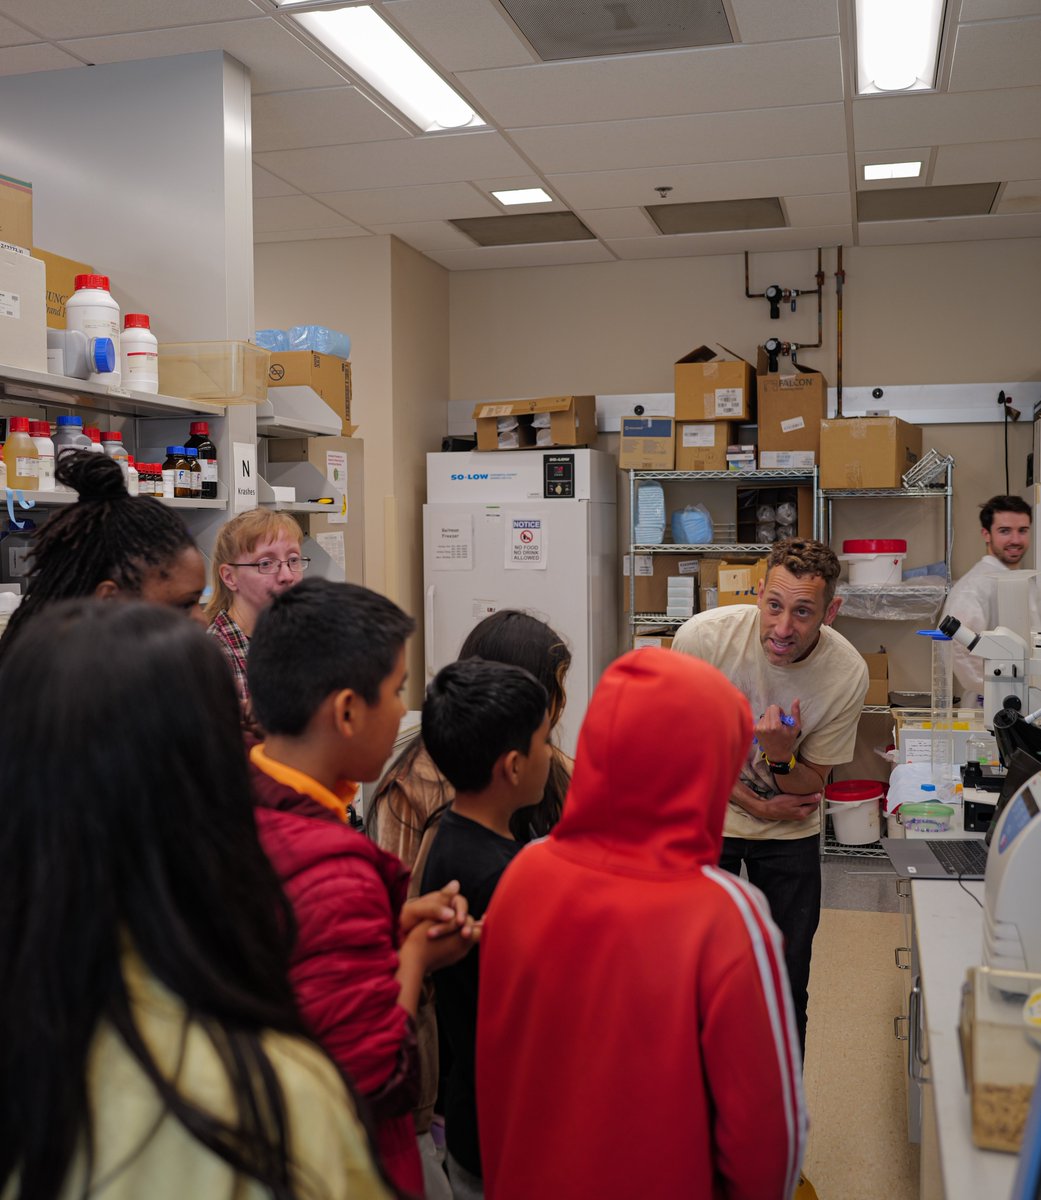 What a pleasure to host students from @MCPS Sargent Shriver Elementary School at the @NIH campus recently, where they met NIDDK scientists, toured some labs, and saw scientific experiments in action. We hope they learned how fun and exciting science can be! -GR @ShriverES